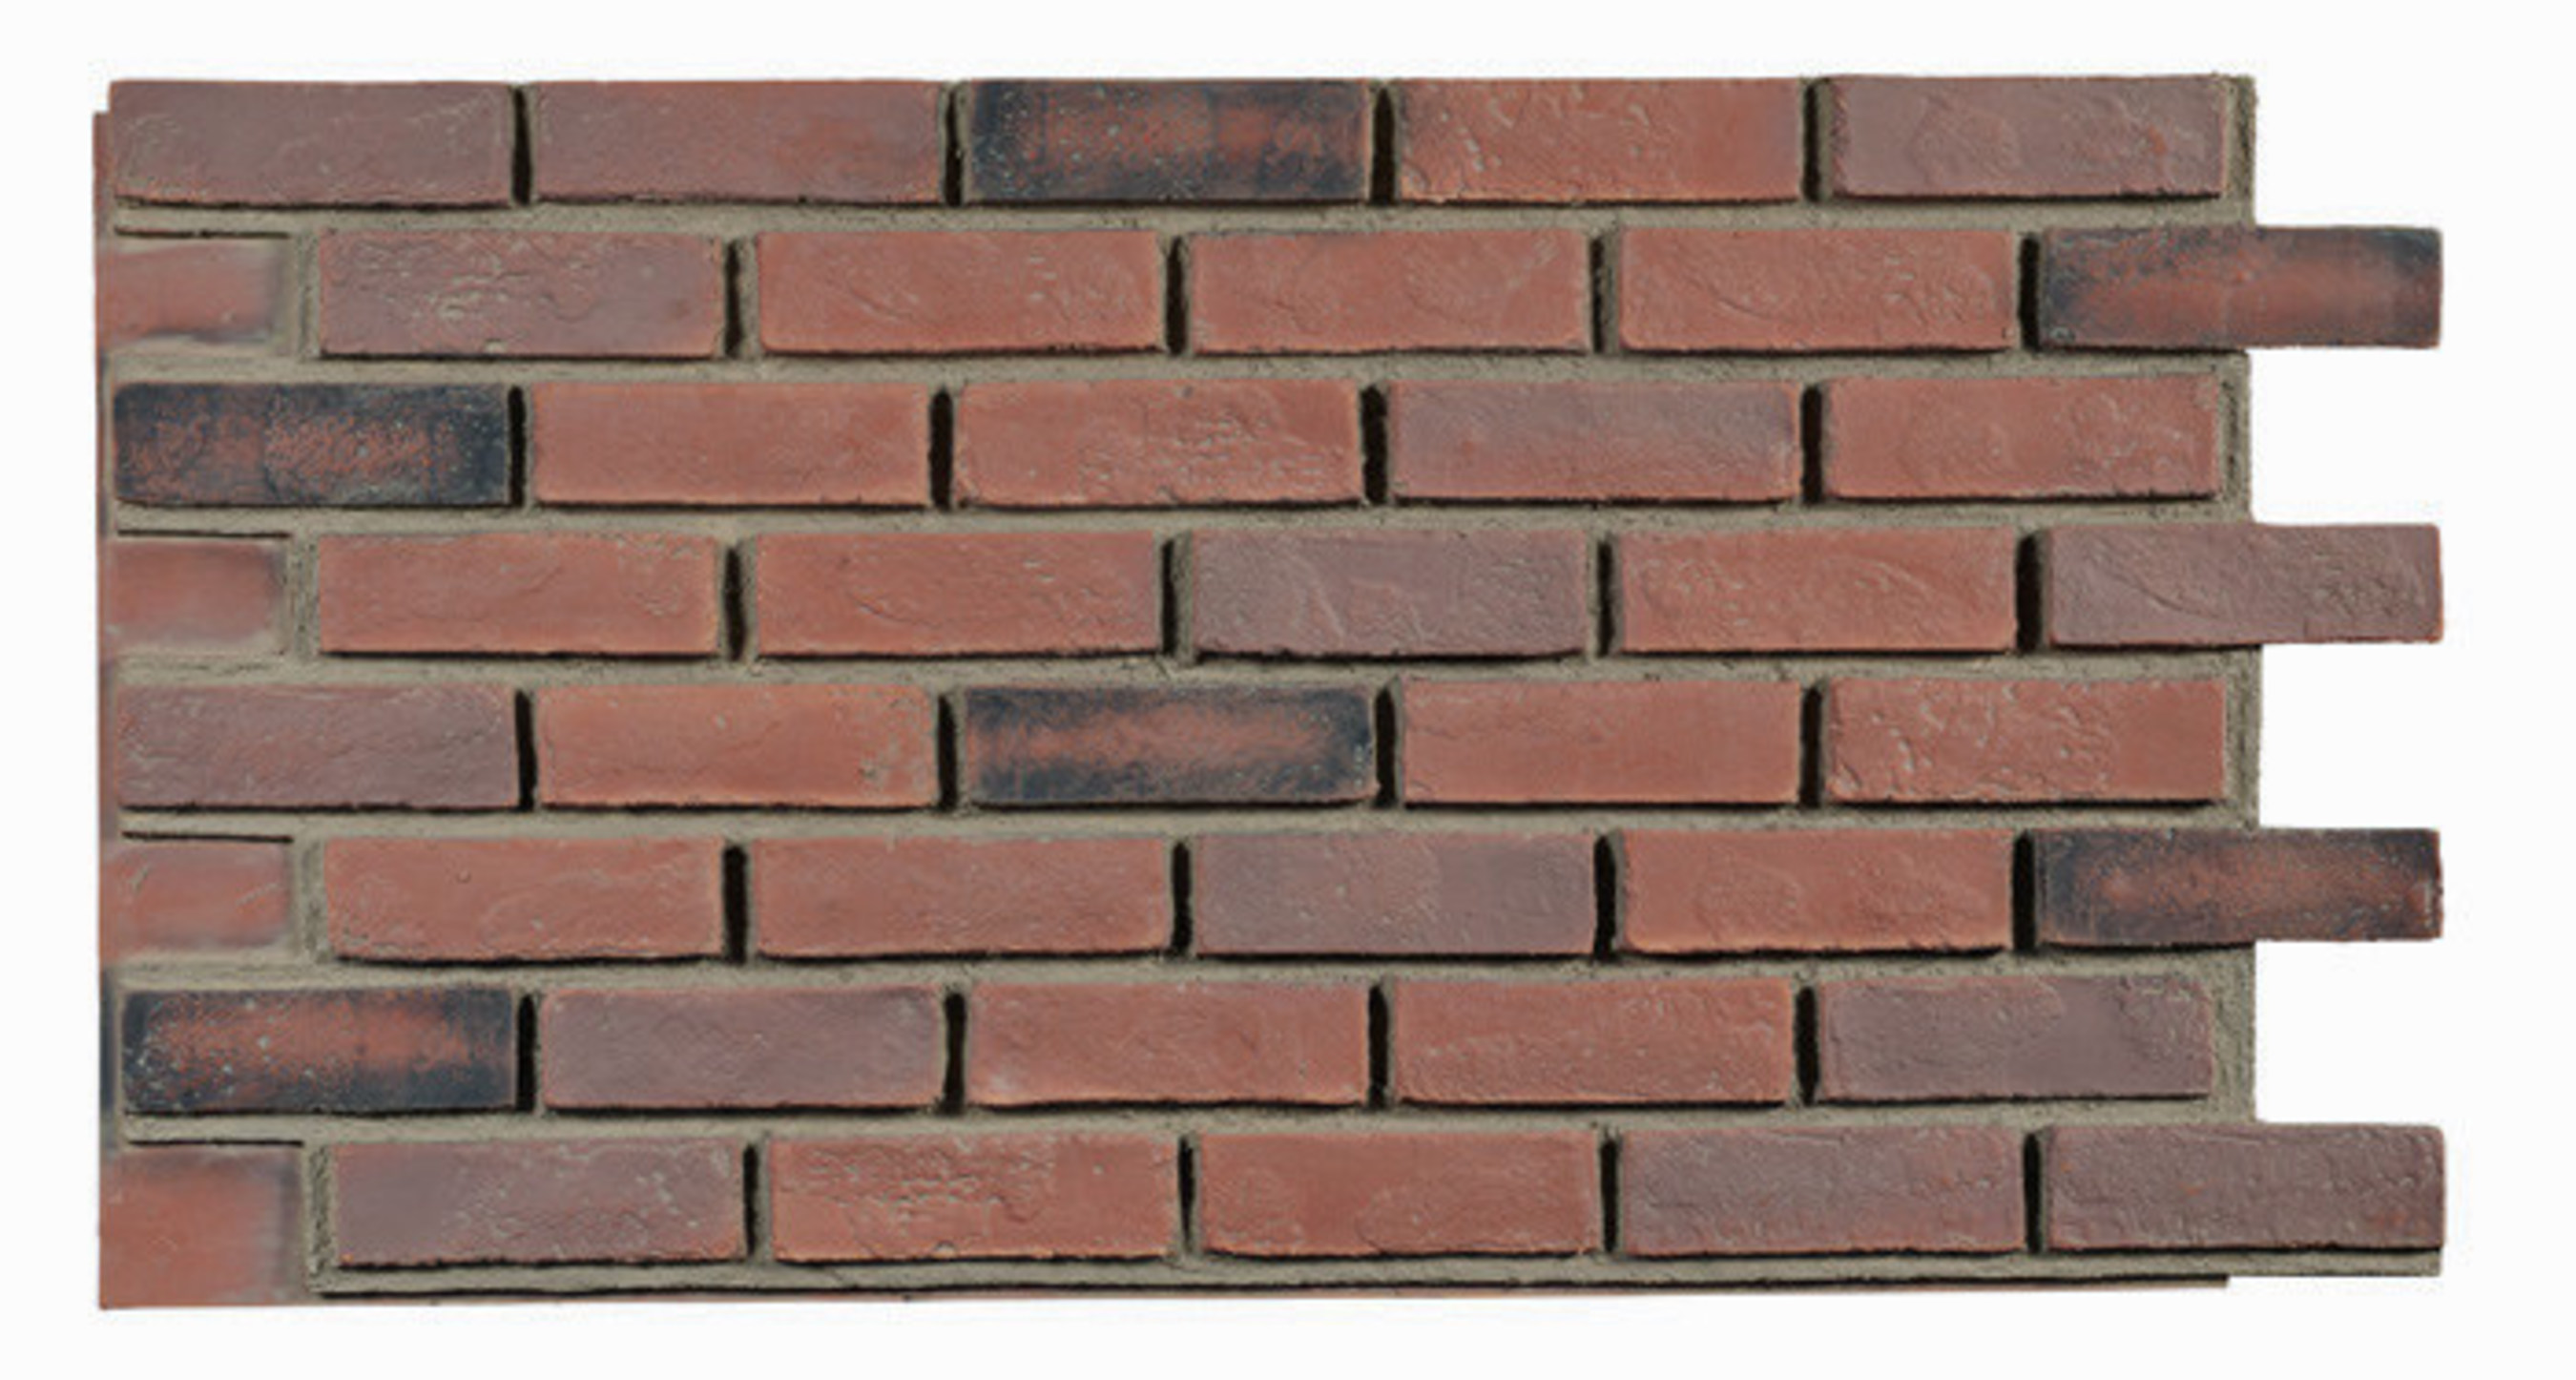 Texture Plus Introduces Trendy New Tumbled Brick Faux Wall ...